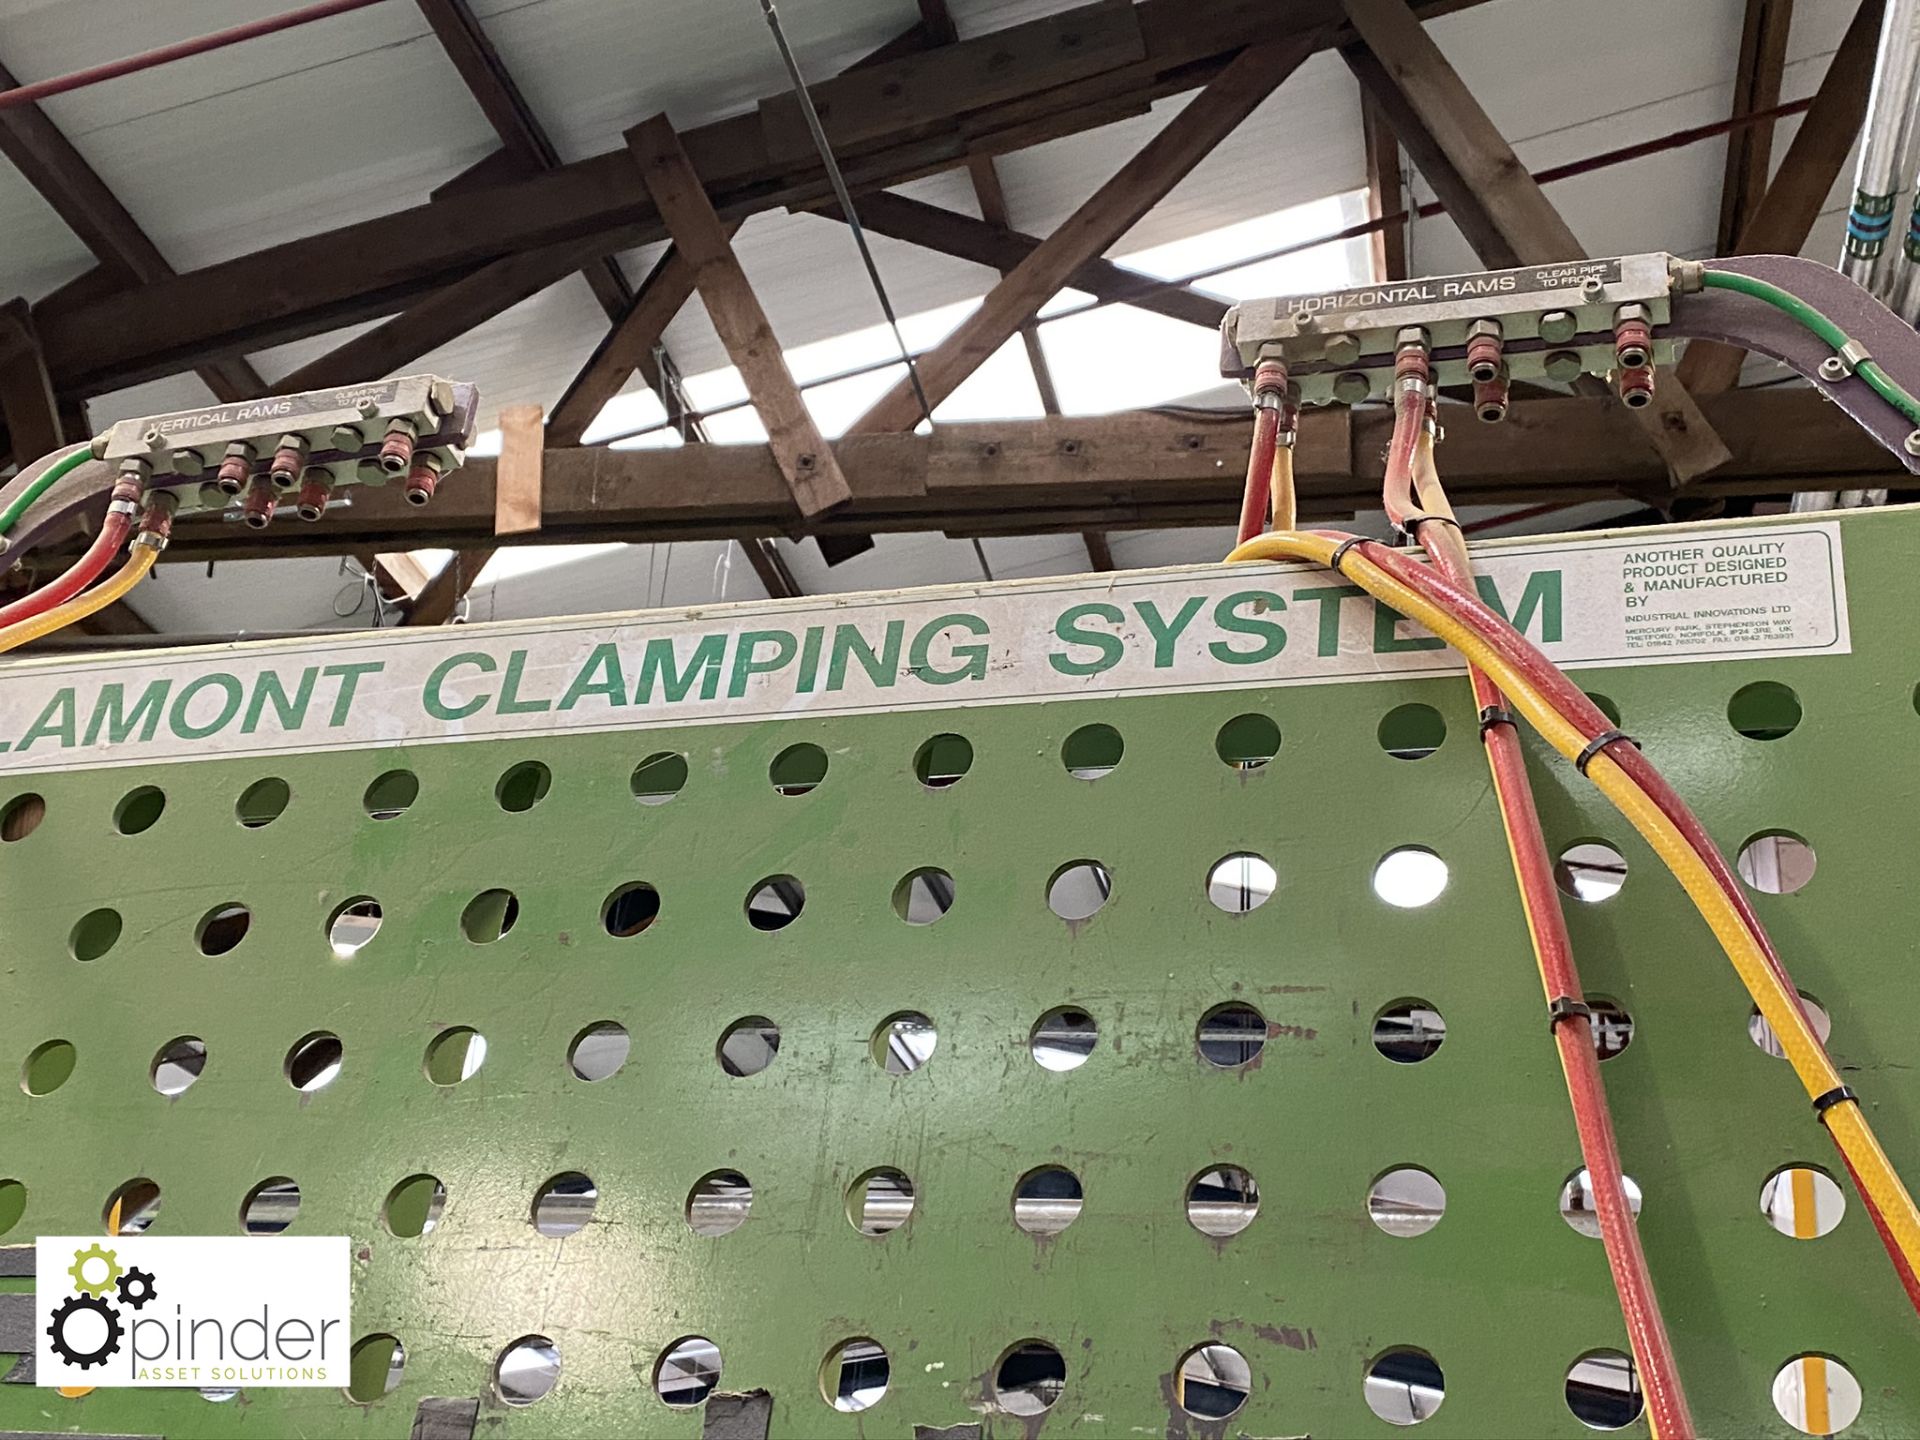 Lamont mobile pneumatic Clamping System, 3600mm x - Image 6 of 6